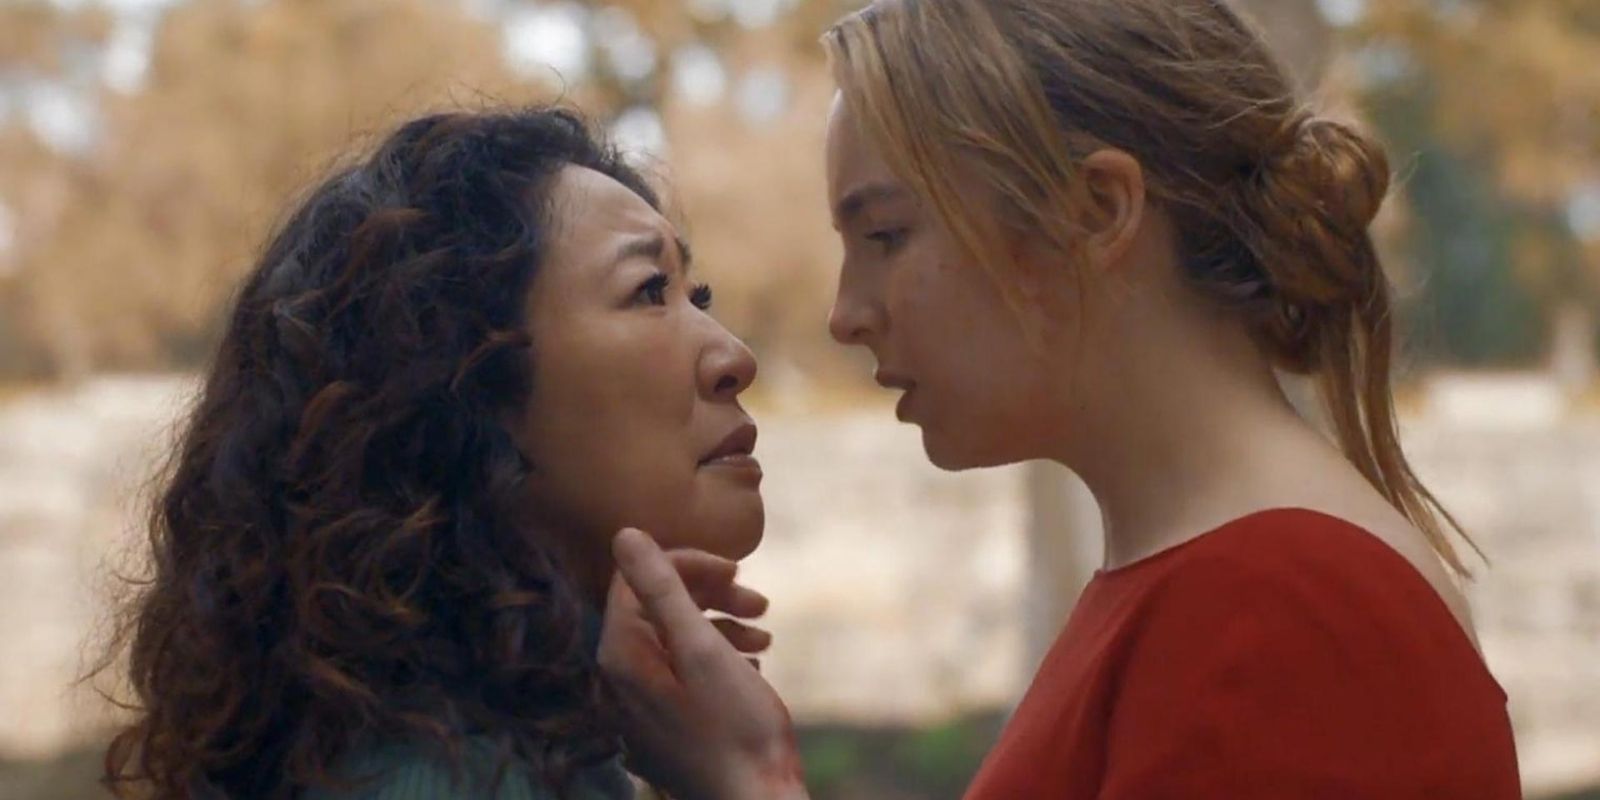 Villanelle touches Eve's face in Killing Eve